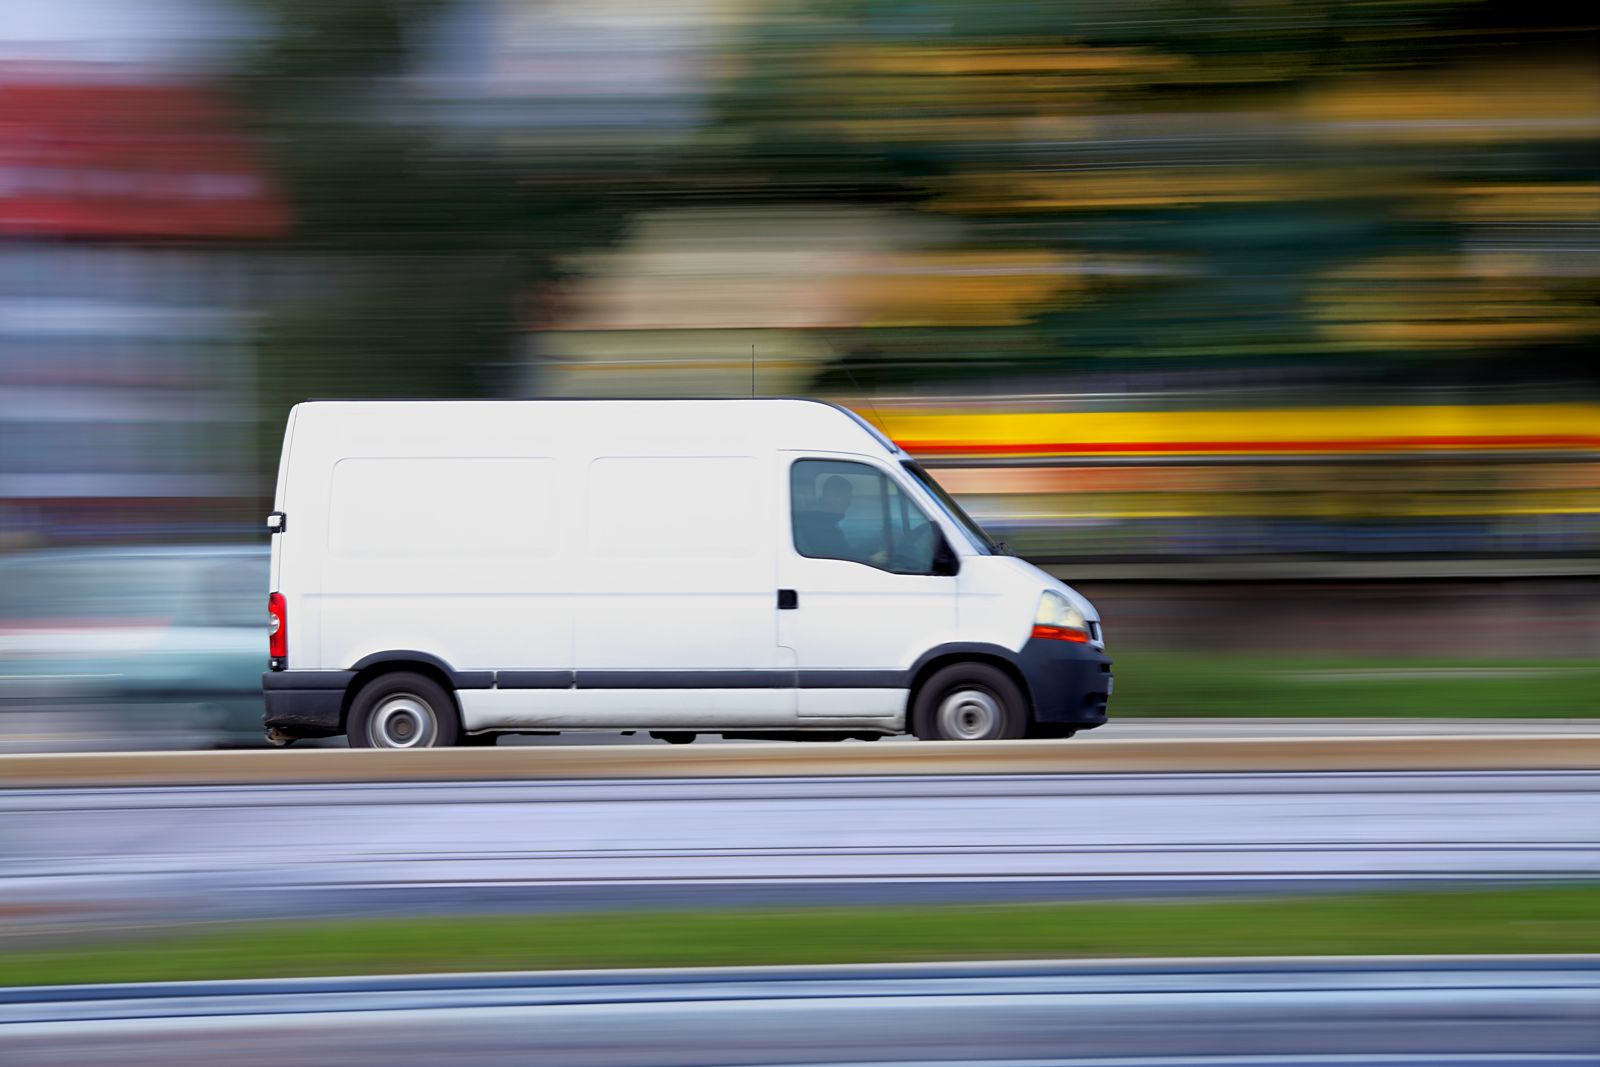 Mansfield Moving Van Accident Lawyers